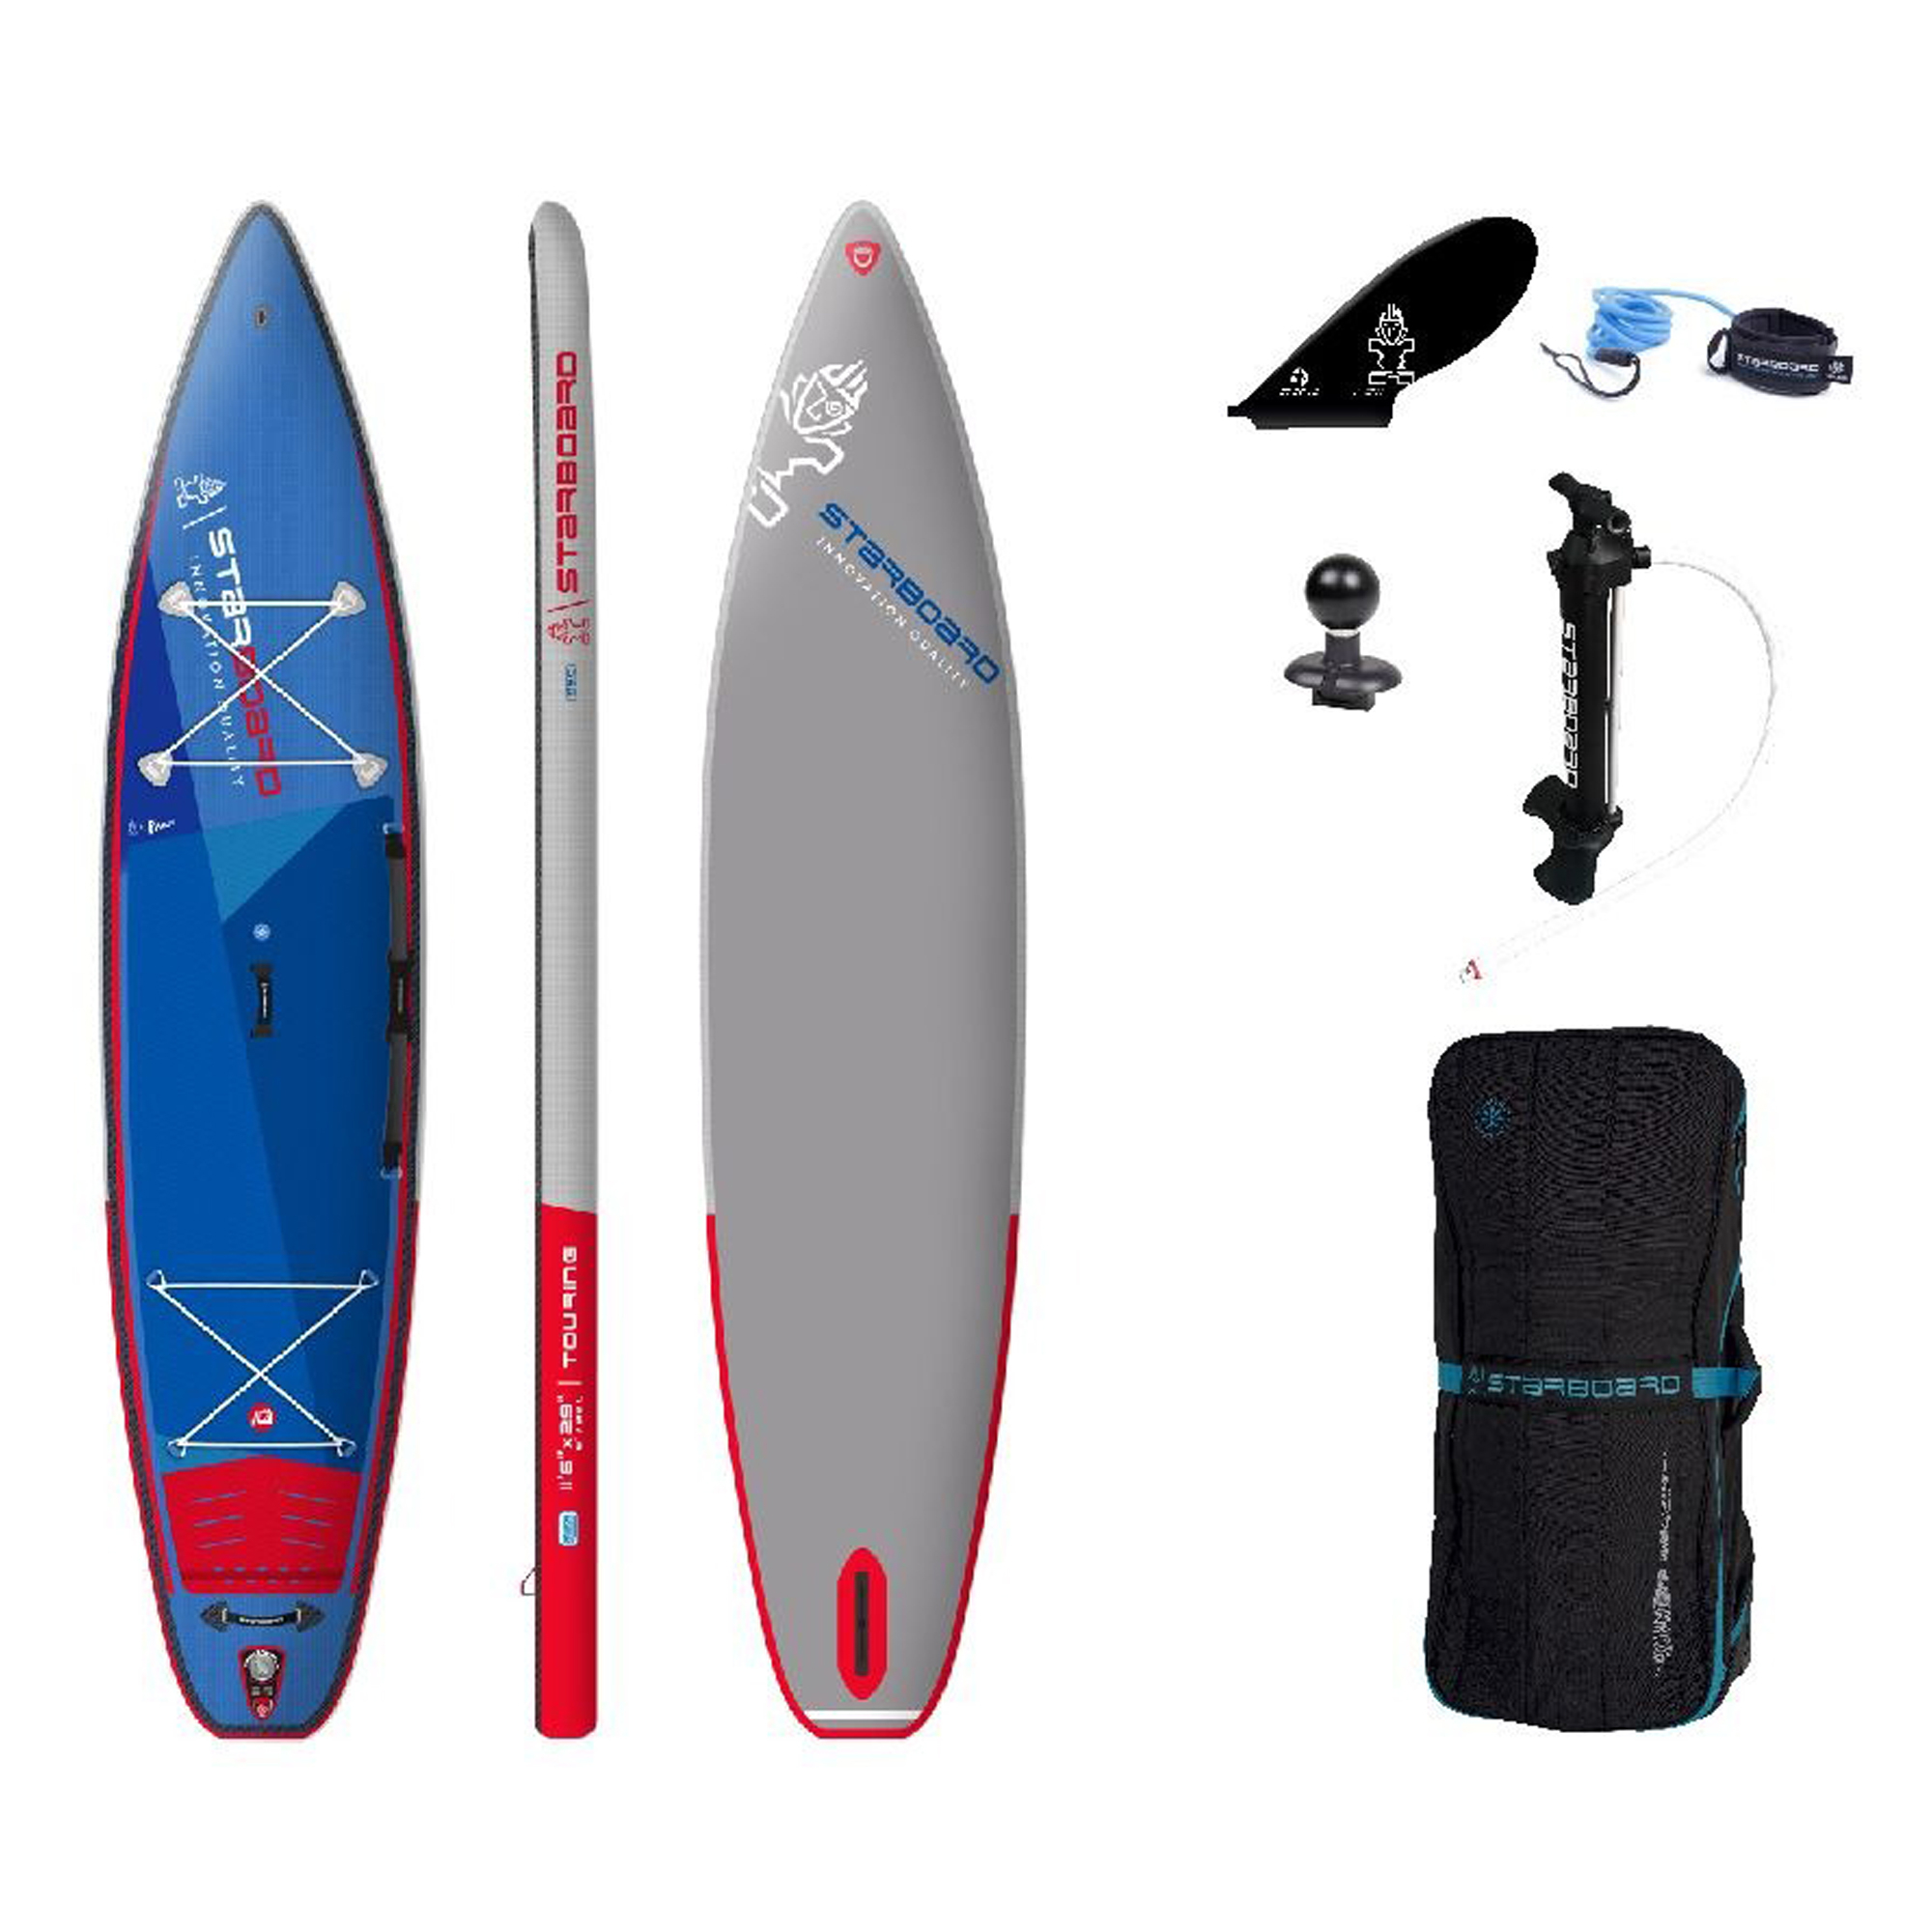 Starboard Touring Deluxe SC 11'6" SUP Board Set